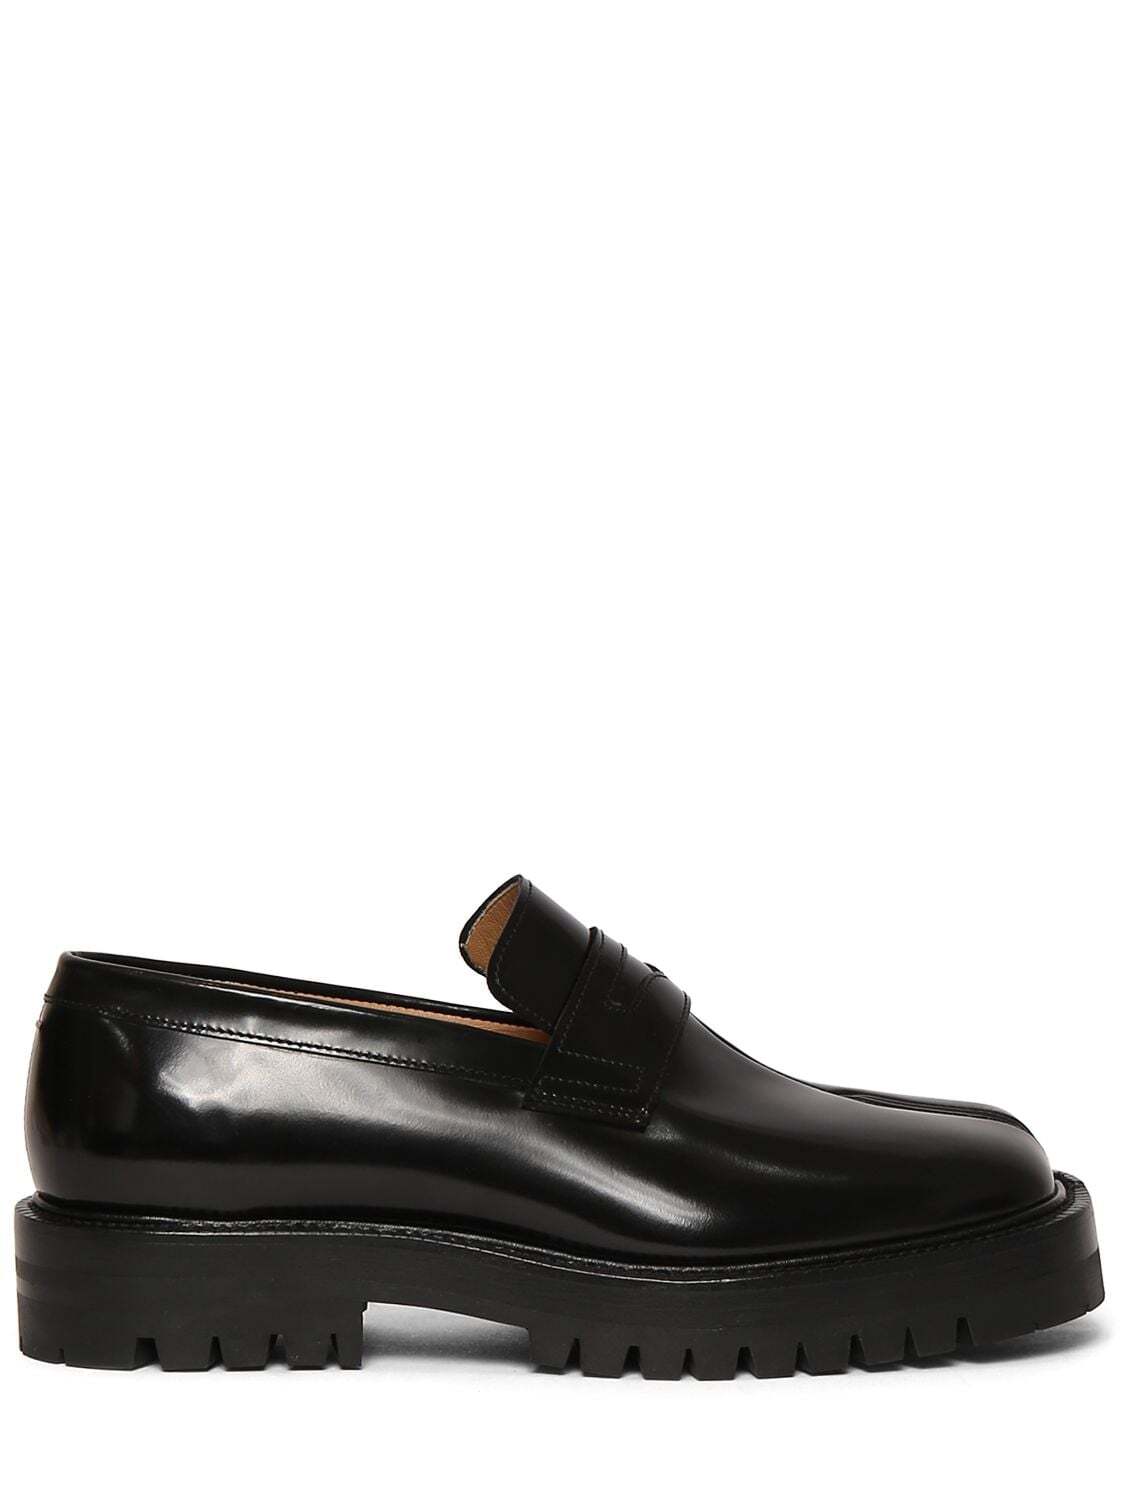 MAISON MARGIELA 30mm Leather Loafers in black